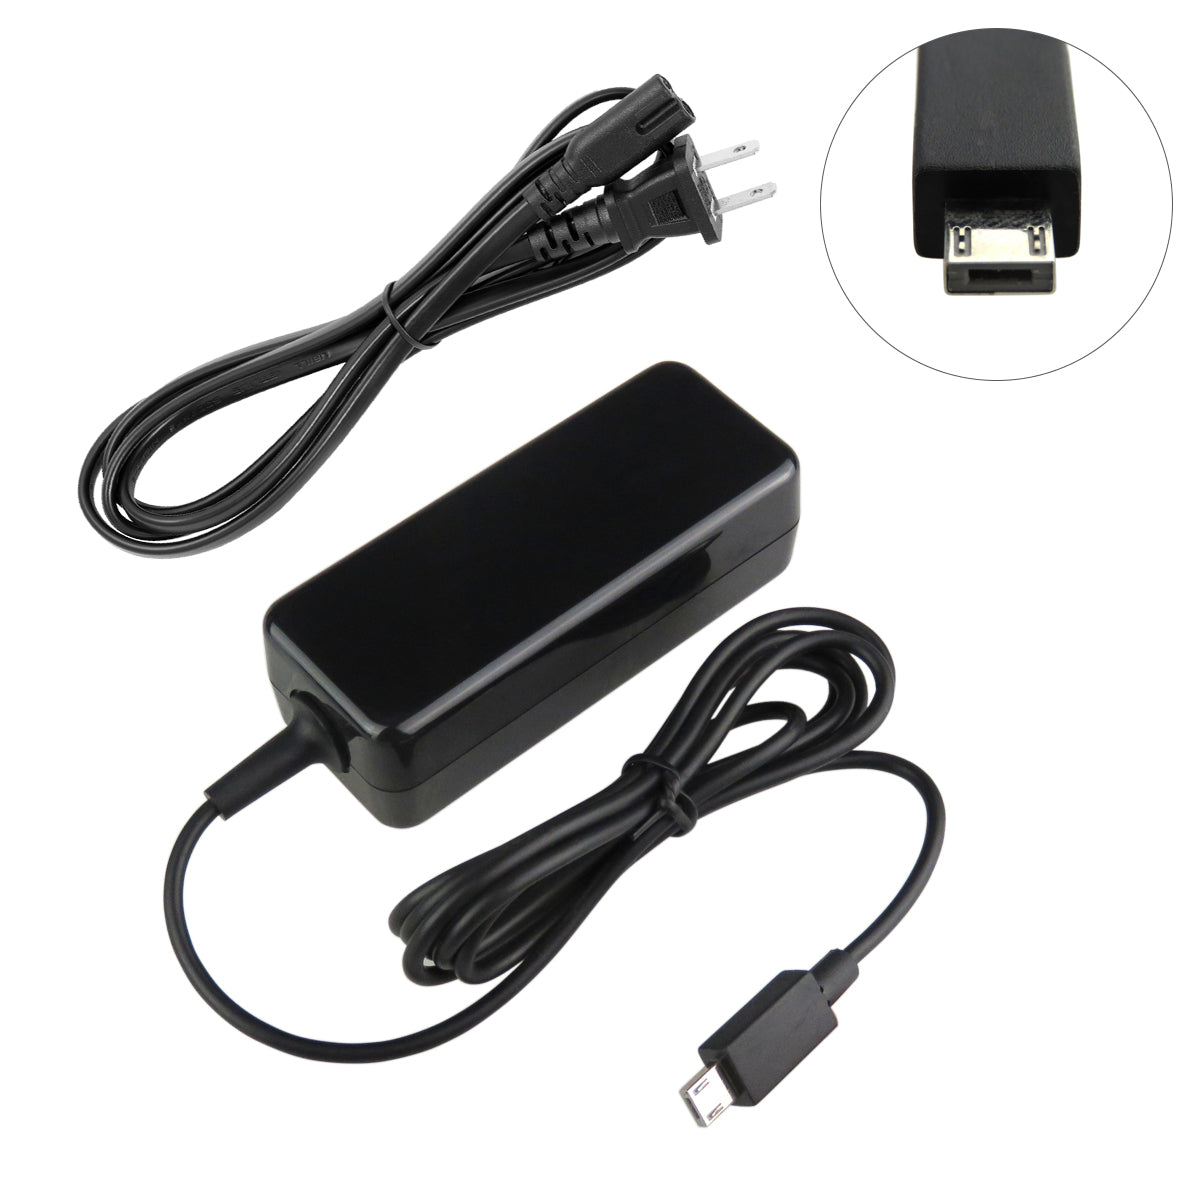 Charger for ASUS EeeBook F205TA-BH01 Laptop.